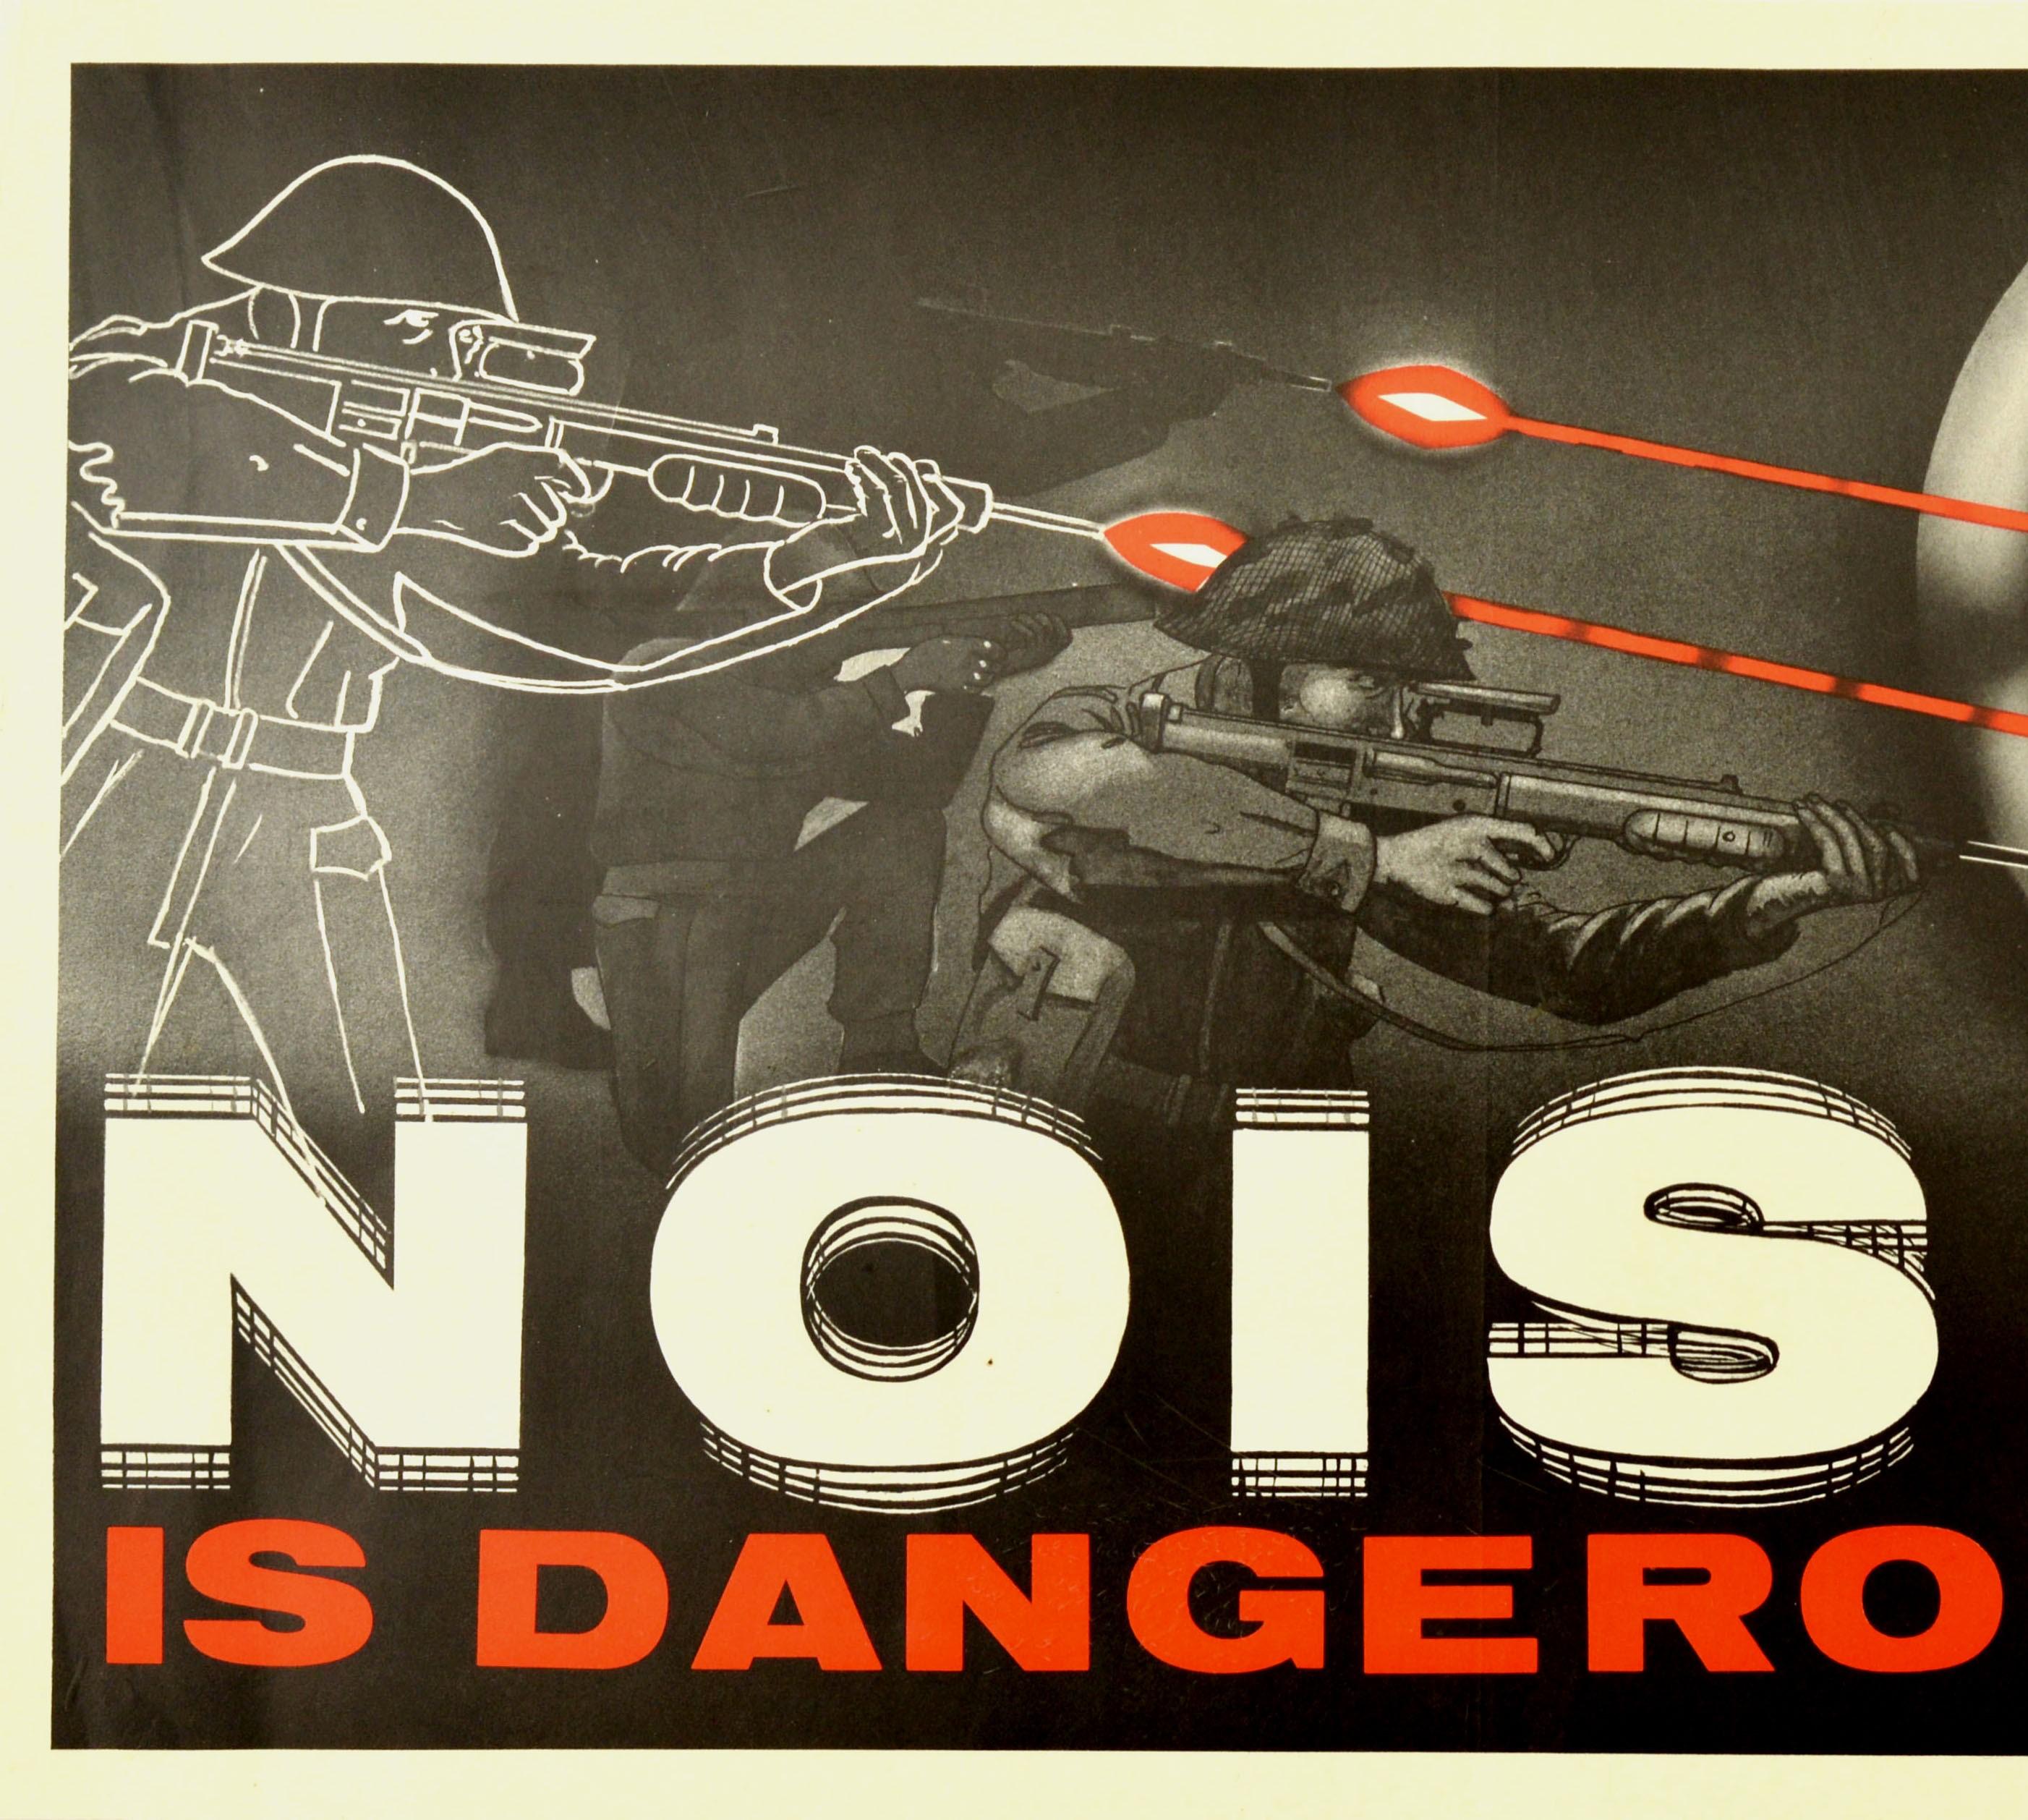 Original vintage RAF Royal Air Force health and safety poster with the warning - Noise Is Dangerous Use Your Ear Plugs - in red and bold white reverberating letters below soldiers in military uniform firing rifle guns with the shots in red lines